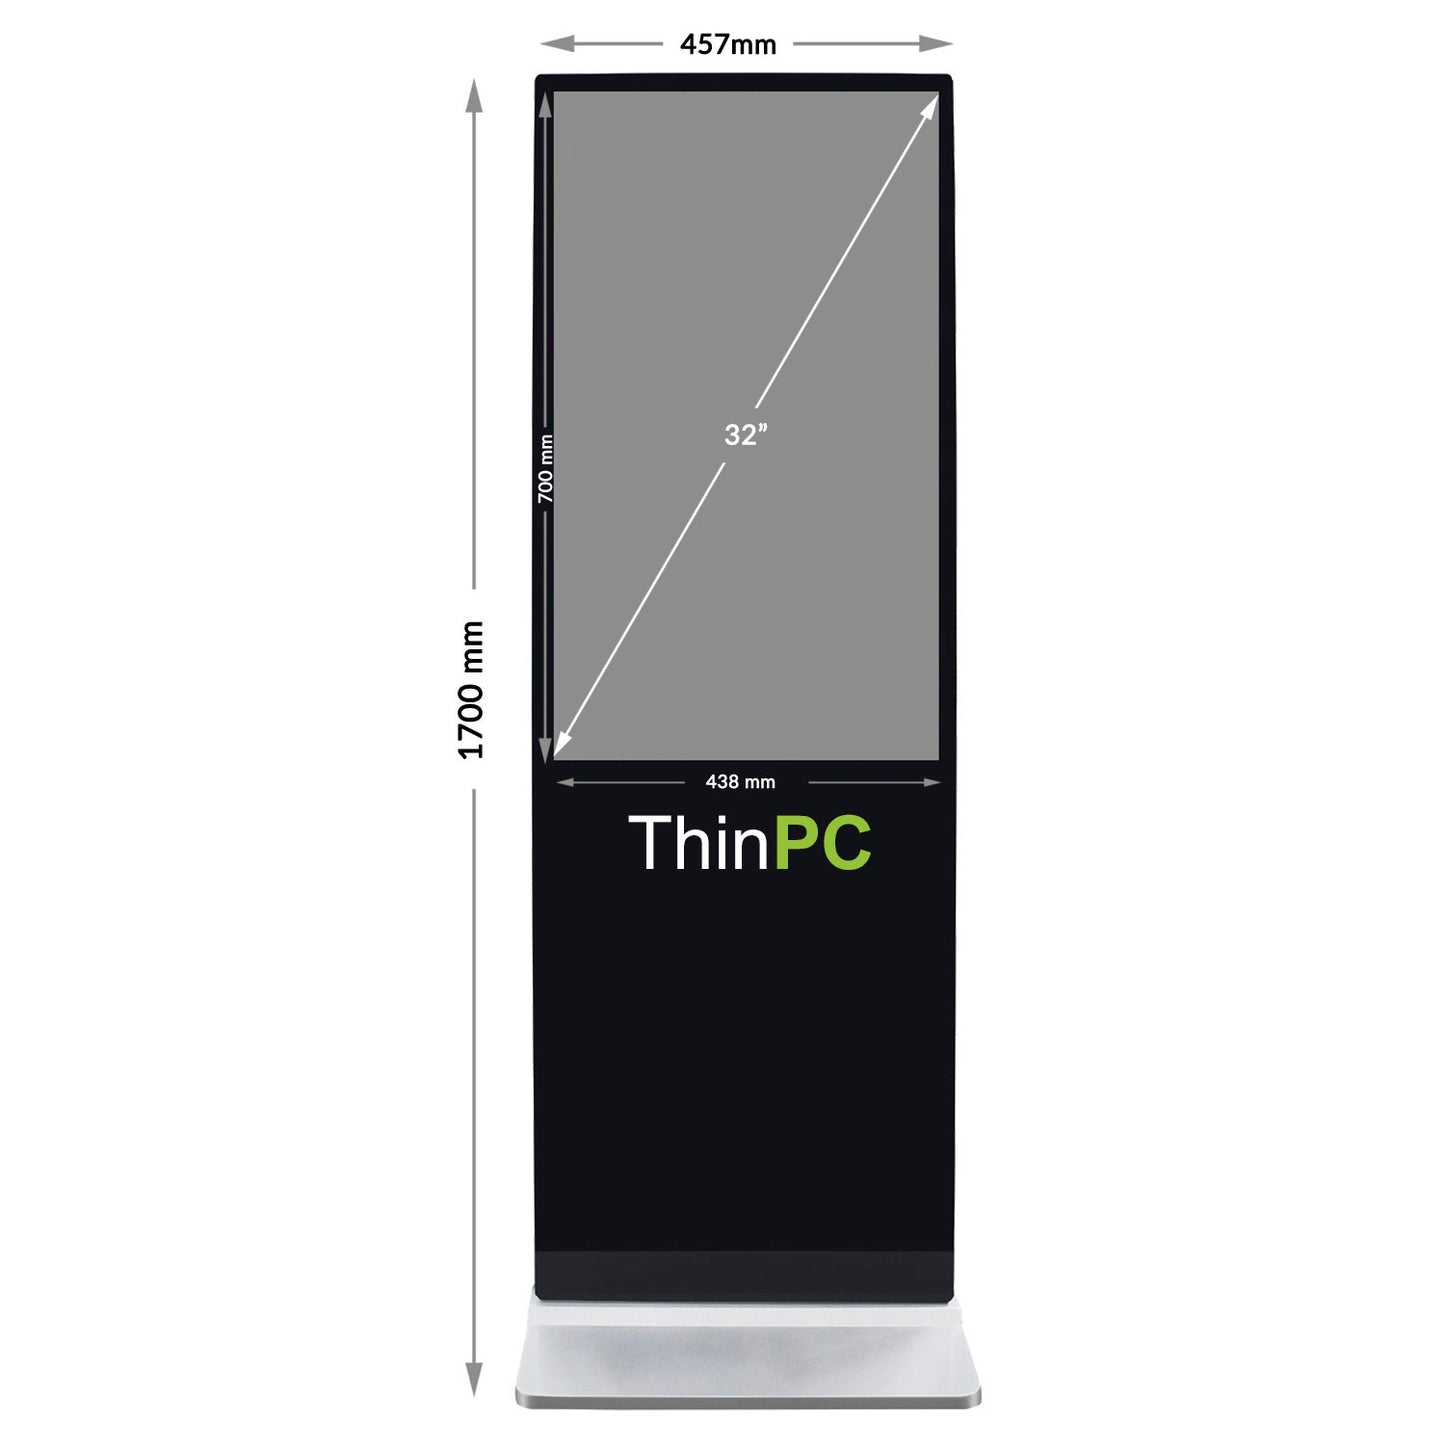 32" Ultraslim Capacitive Touch Display Standee